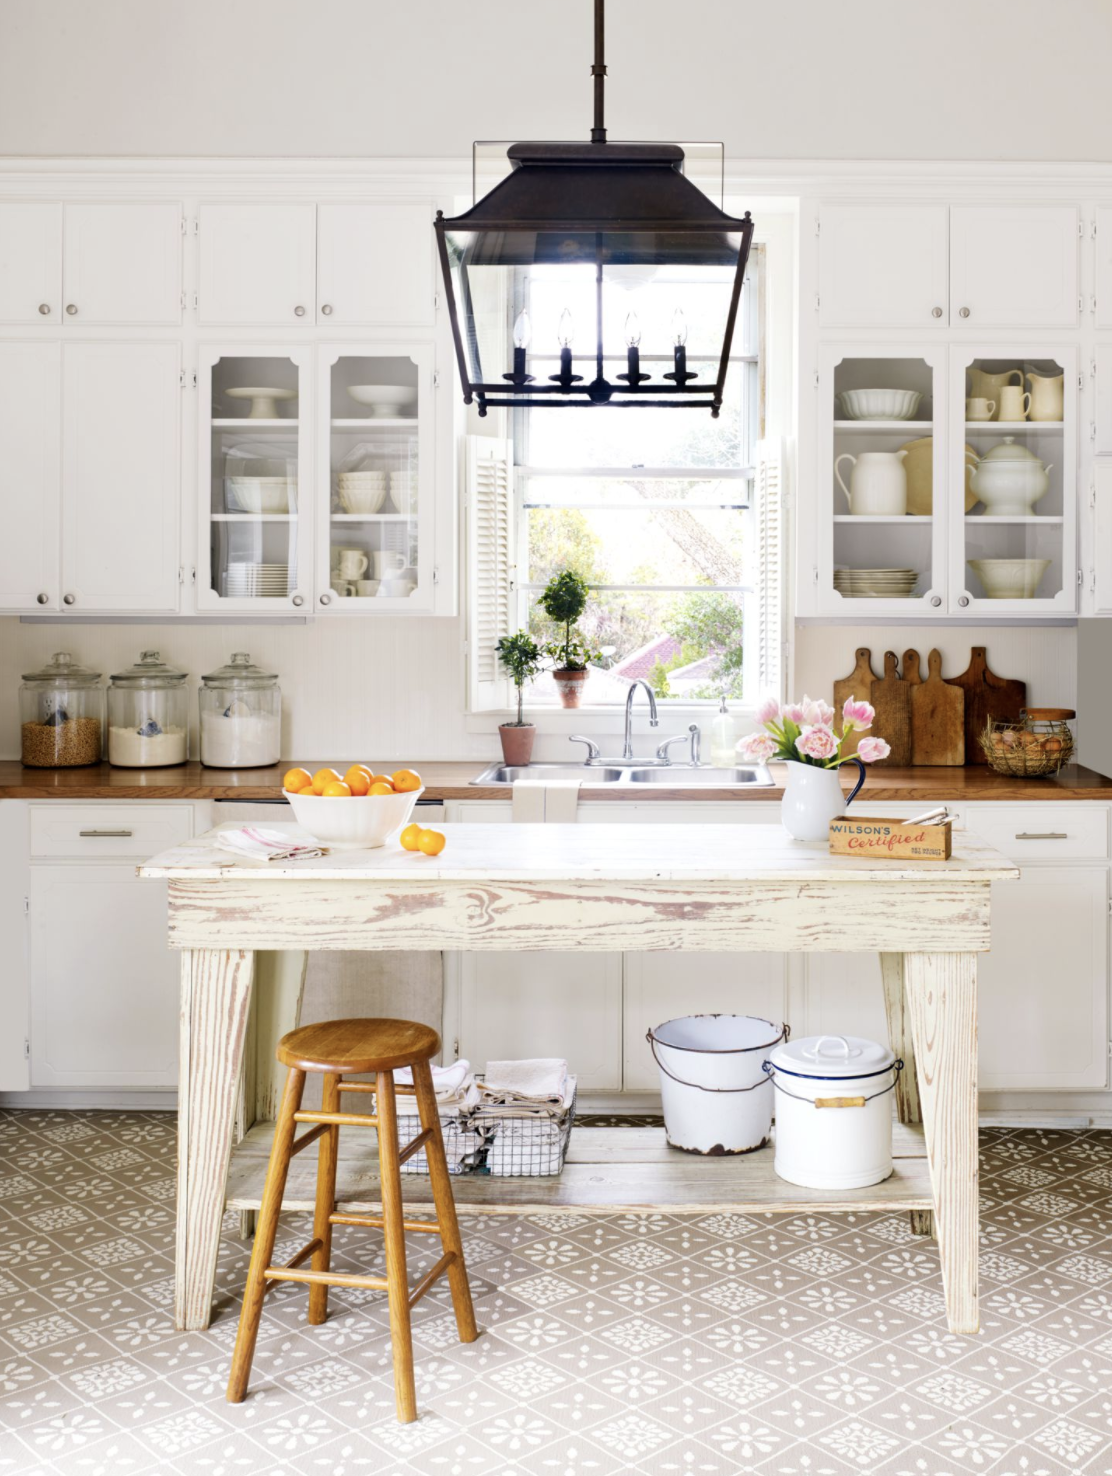 https://hips.hearstapps.com/hmg-prod/images/french-country-kitchen-ideas-annie-schlechter-1649037269.png